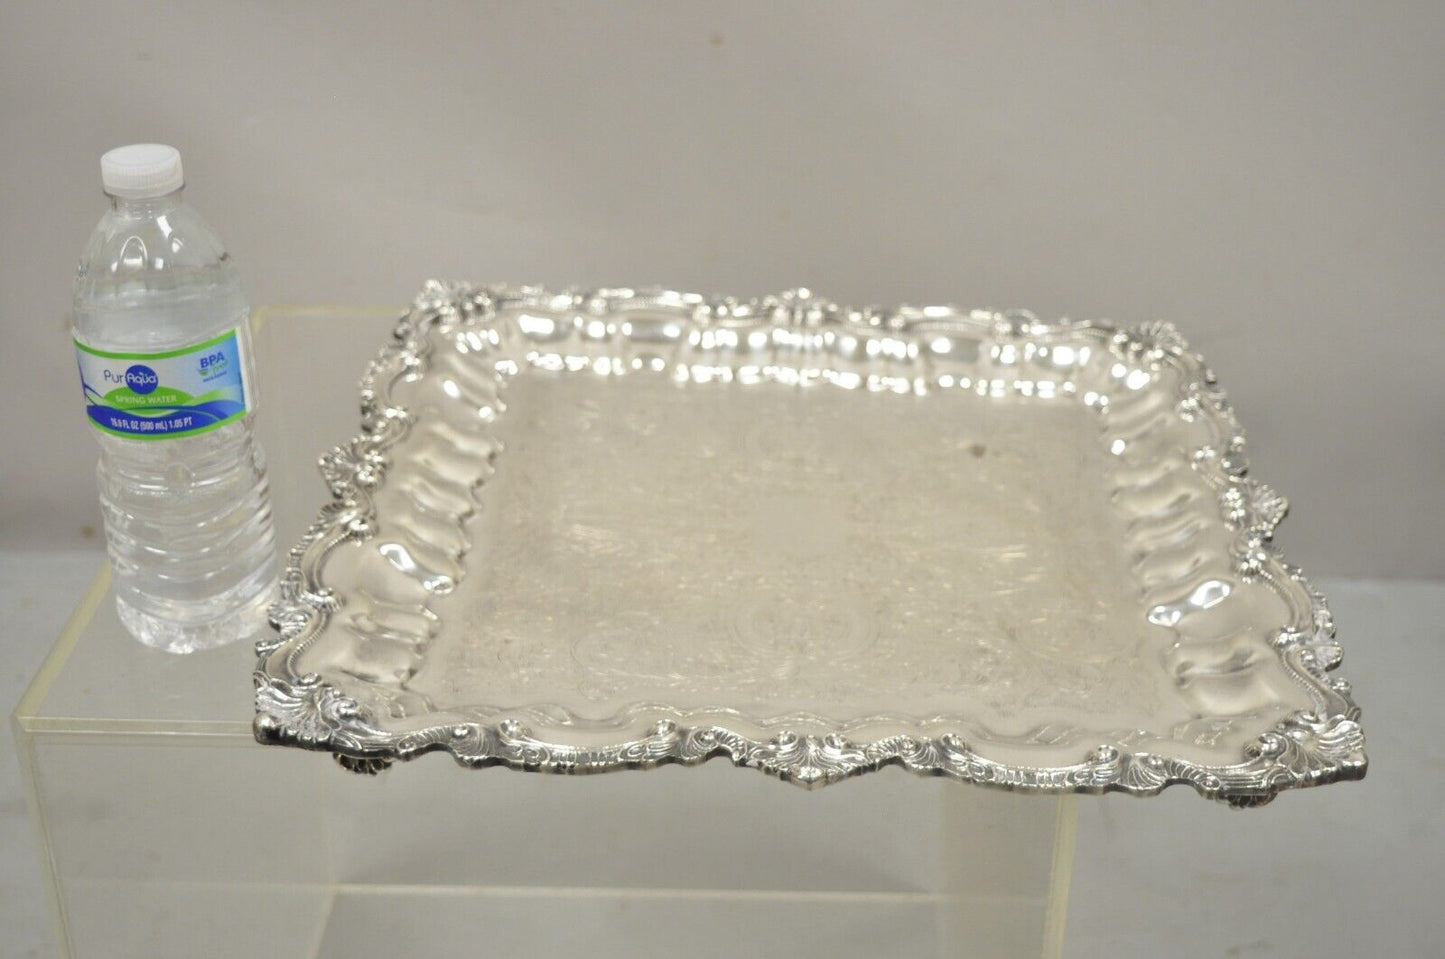 Chippendale by Wallace X 120 Silver Plate 16" Square Shell Platter Tray on Feet